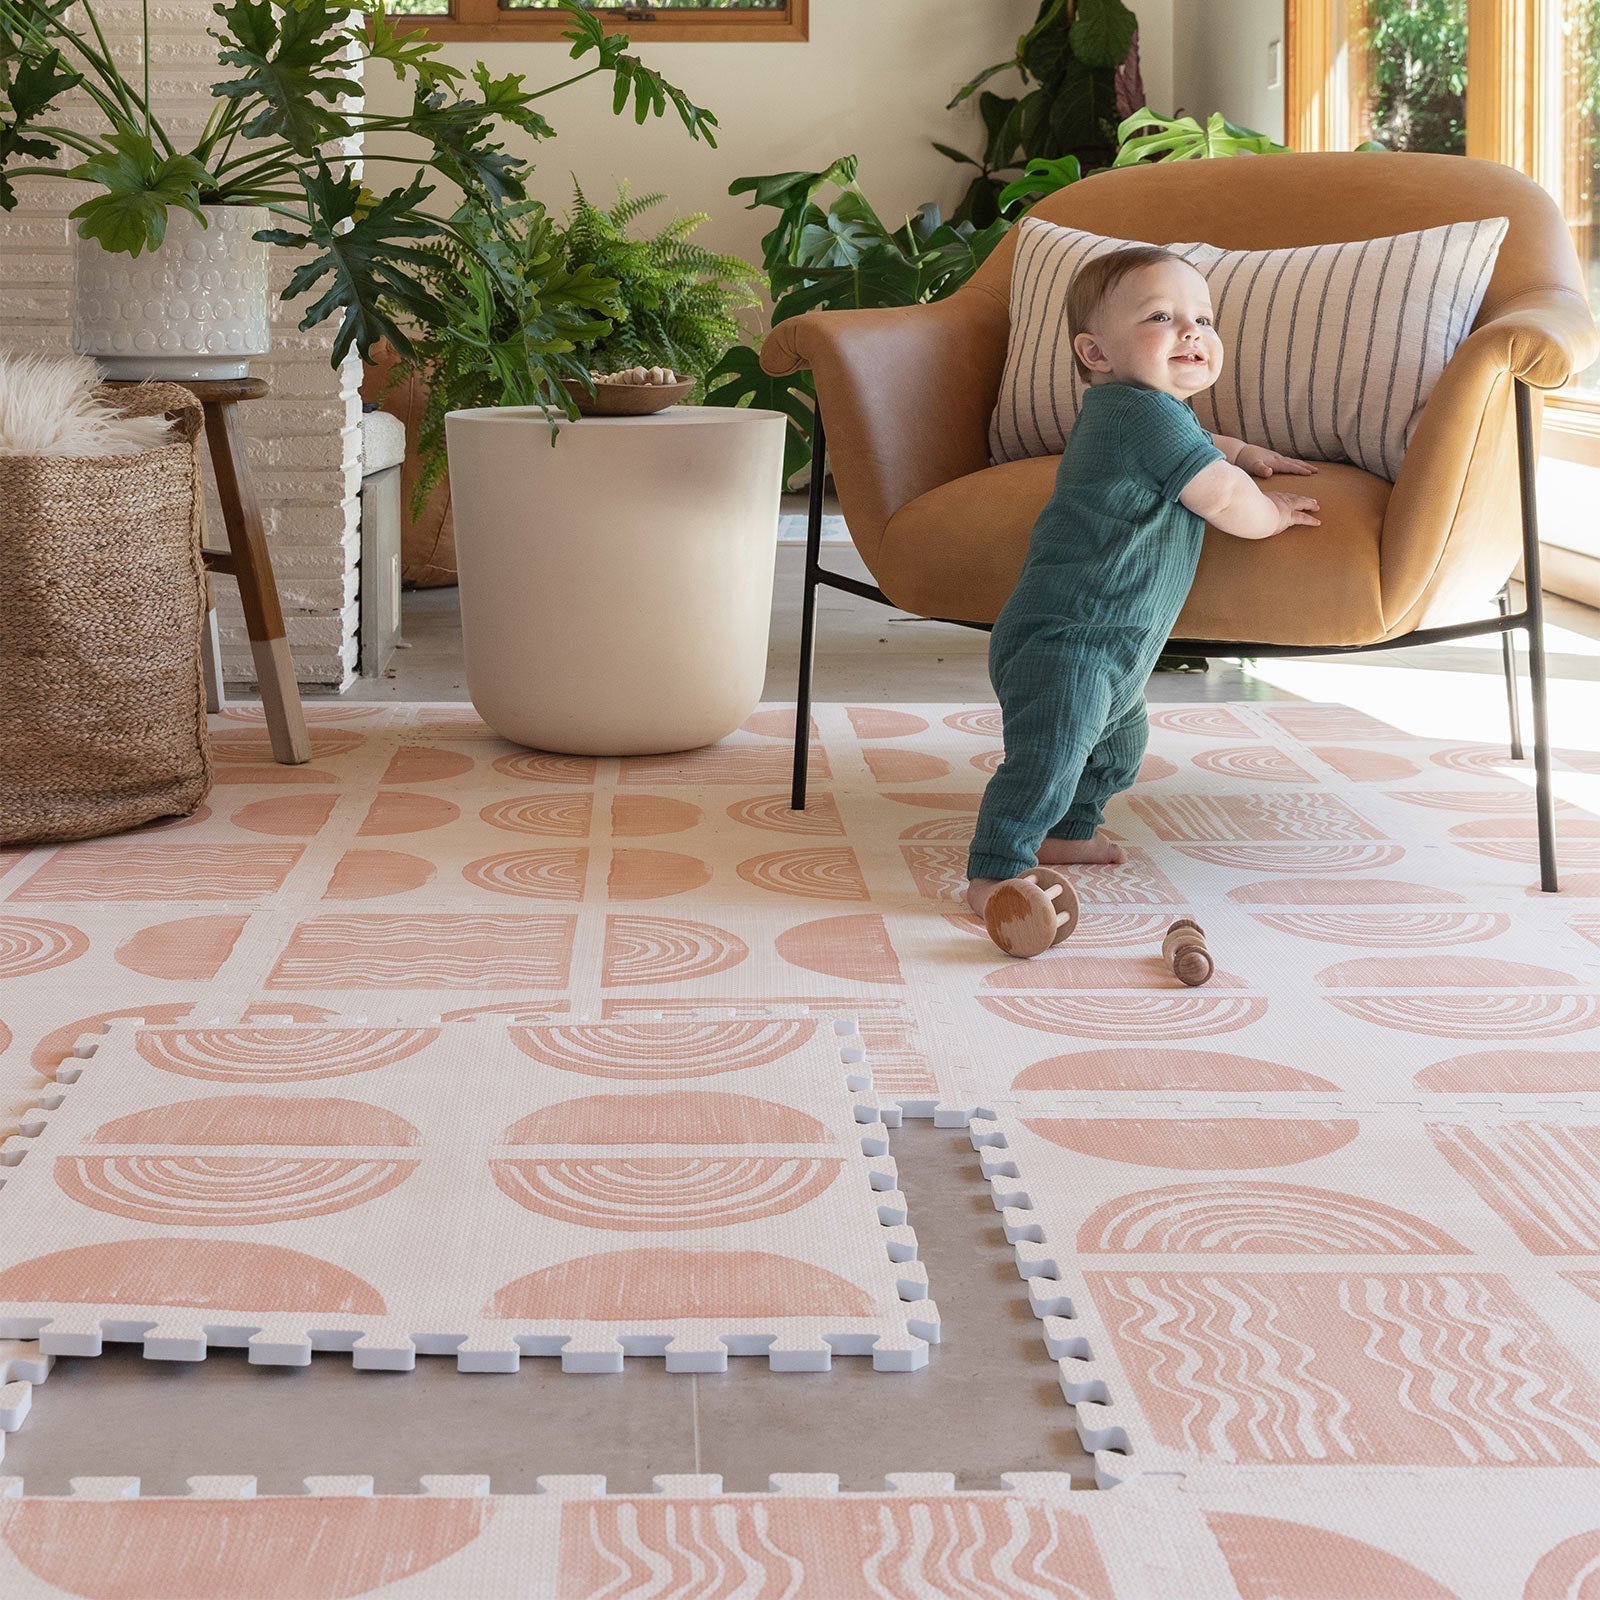 Ada modern minimalist baby play mat in Melon, peach pink and off white. Shown in living room with one tile lifted up and baby standing up against a chair.